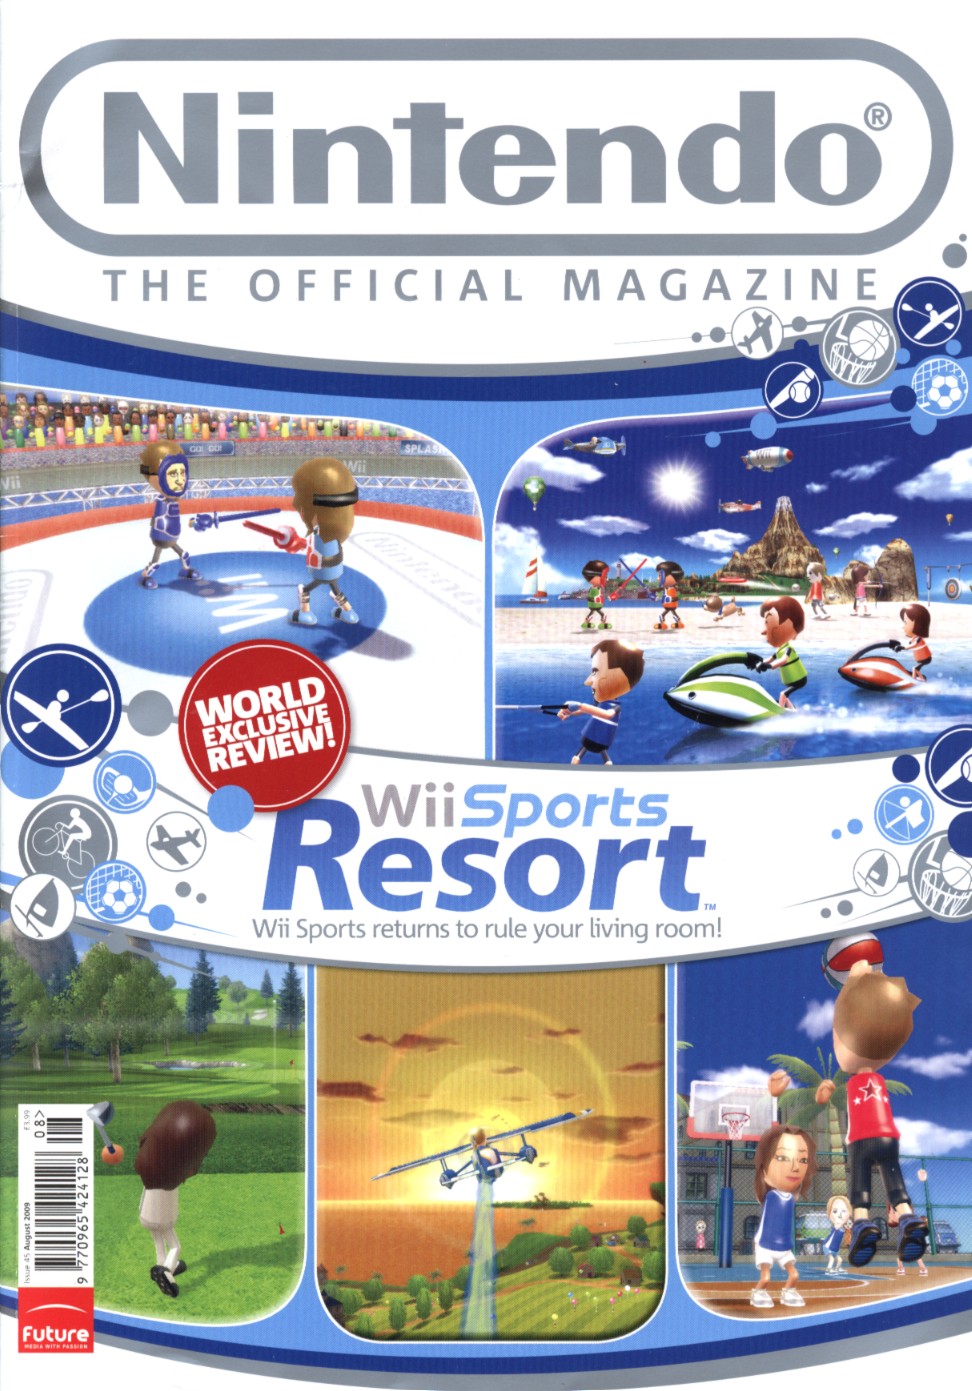 Image Official Nintendo Magazine Issue 45.jpg Magazines from the